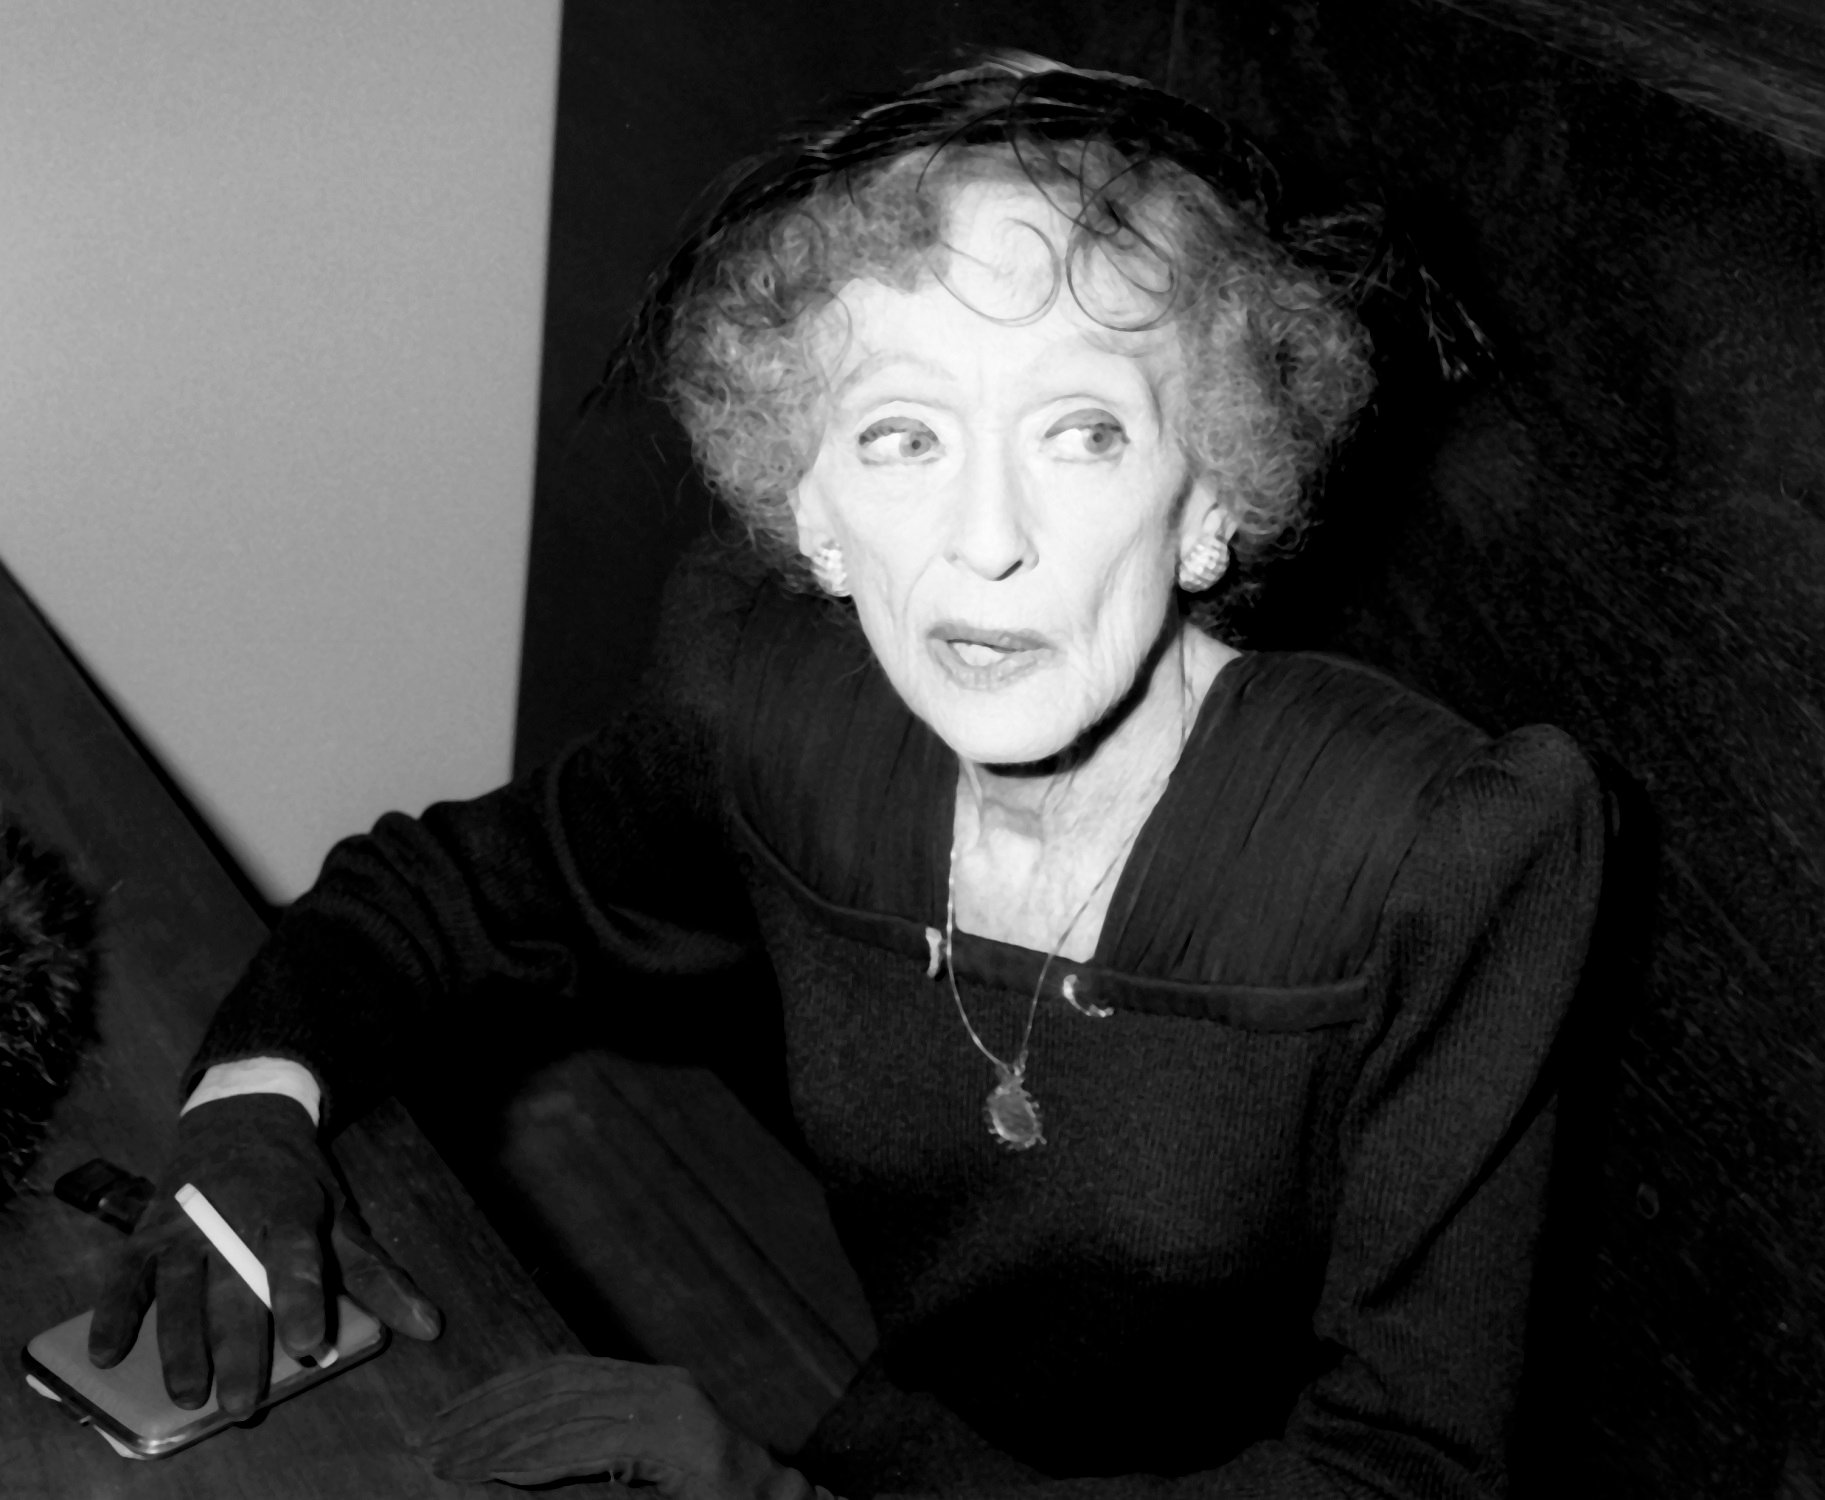 Bette Davis attends the American Film Institute Party on March 11, 1987 at Kat Mantilini Restaurant in Beverly Hills, California